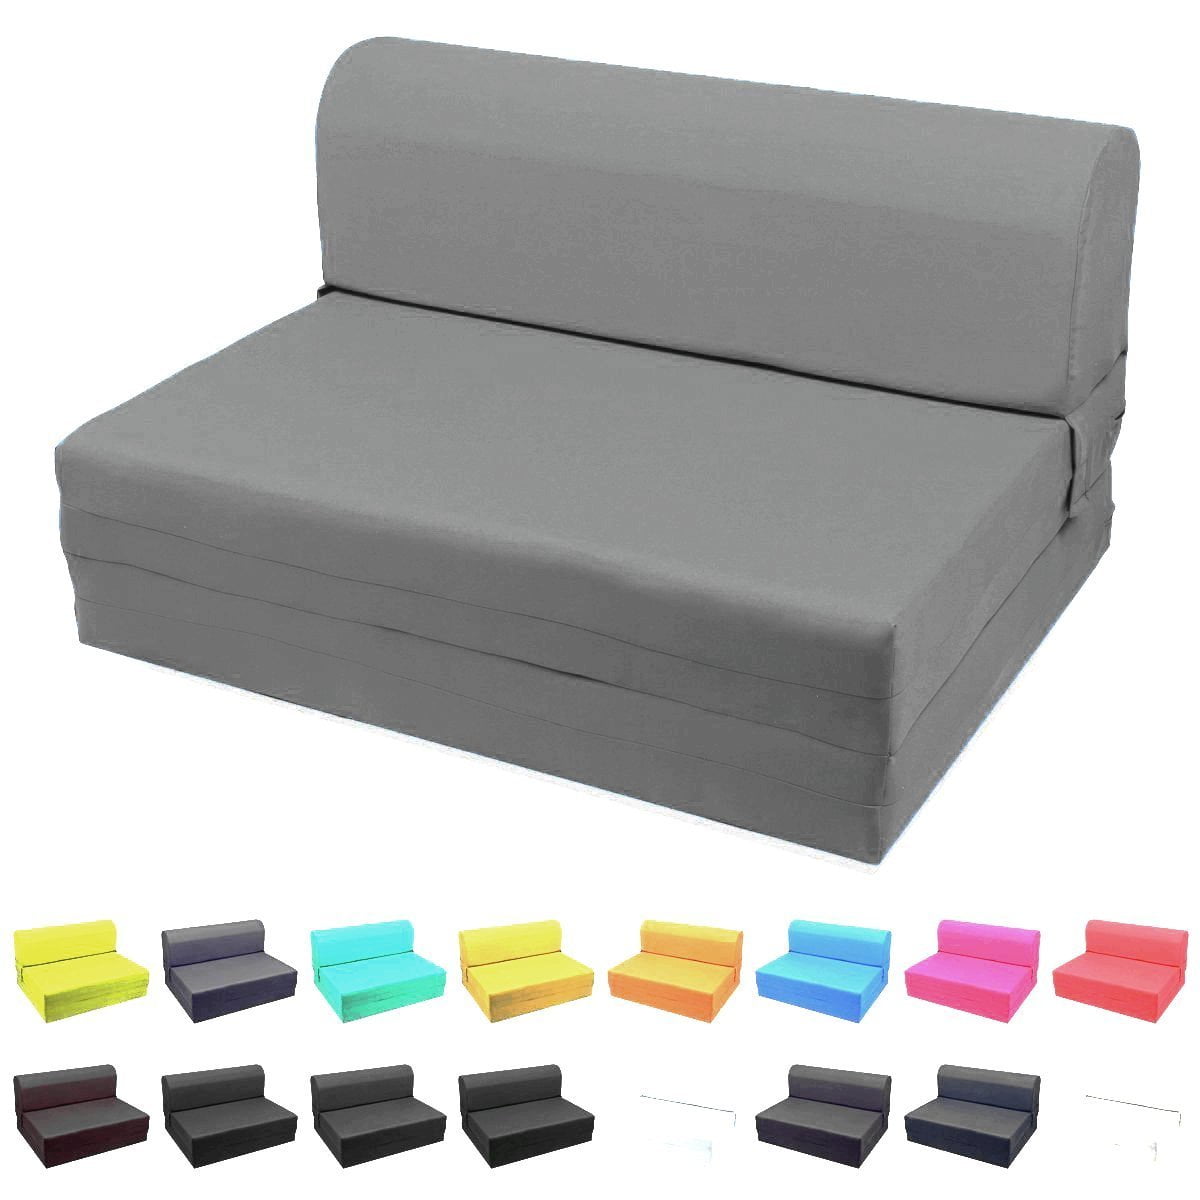 Twin Sleeper Chair Folding Foam Beds Rose Black Foldable Sofa Couches 6x32x70 